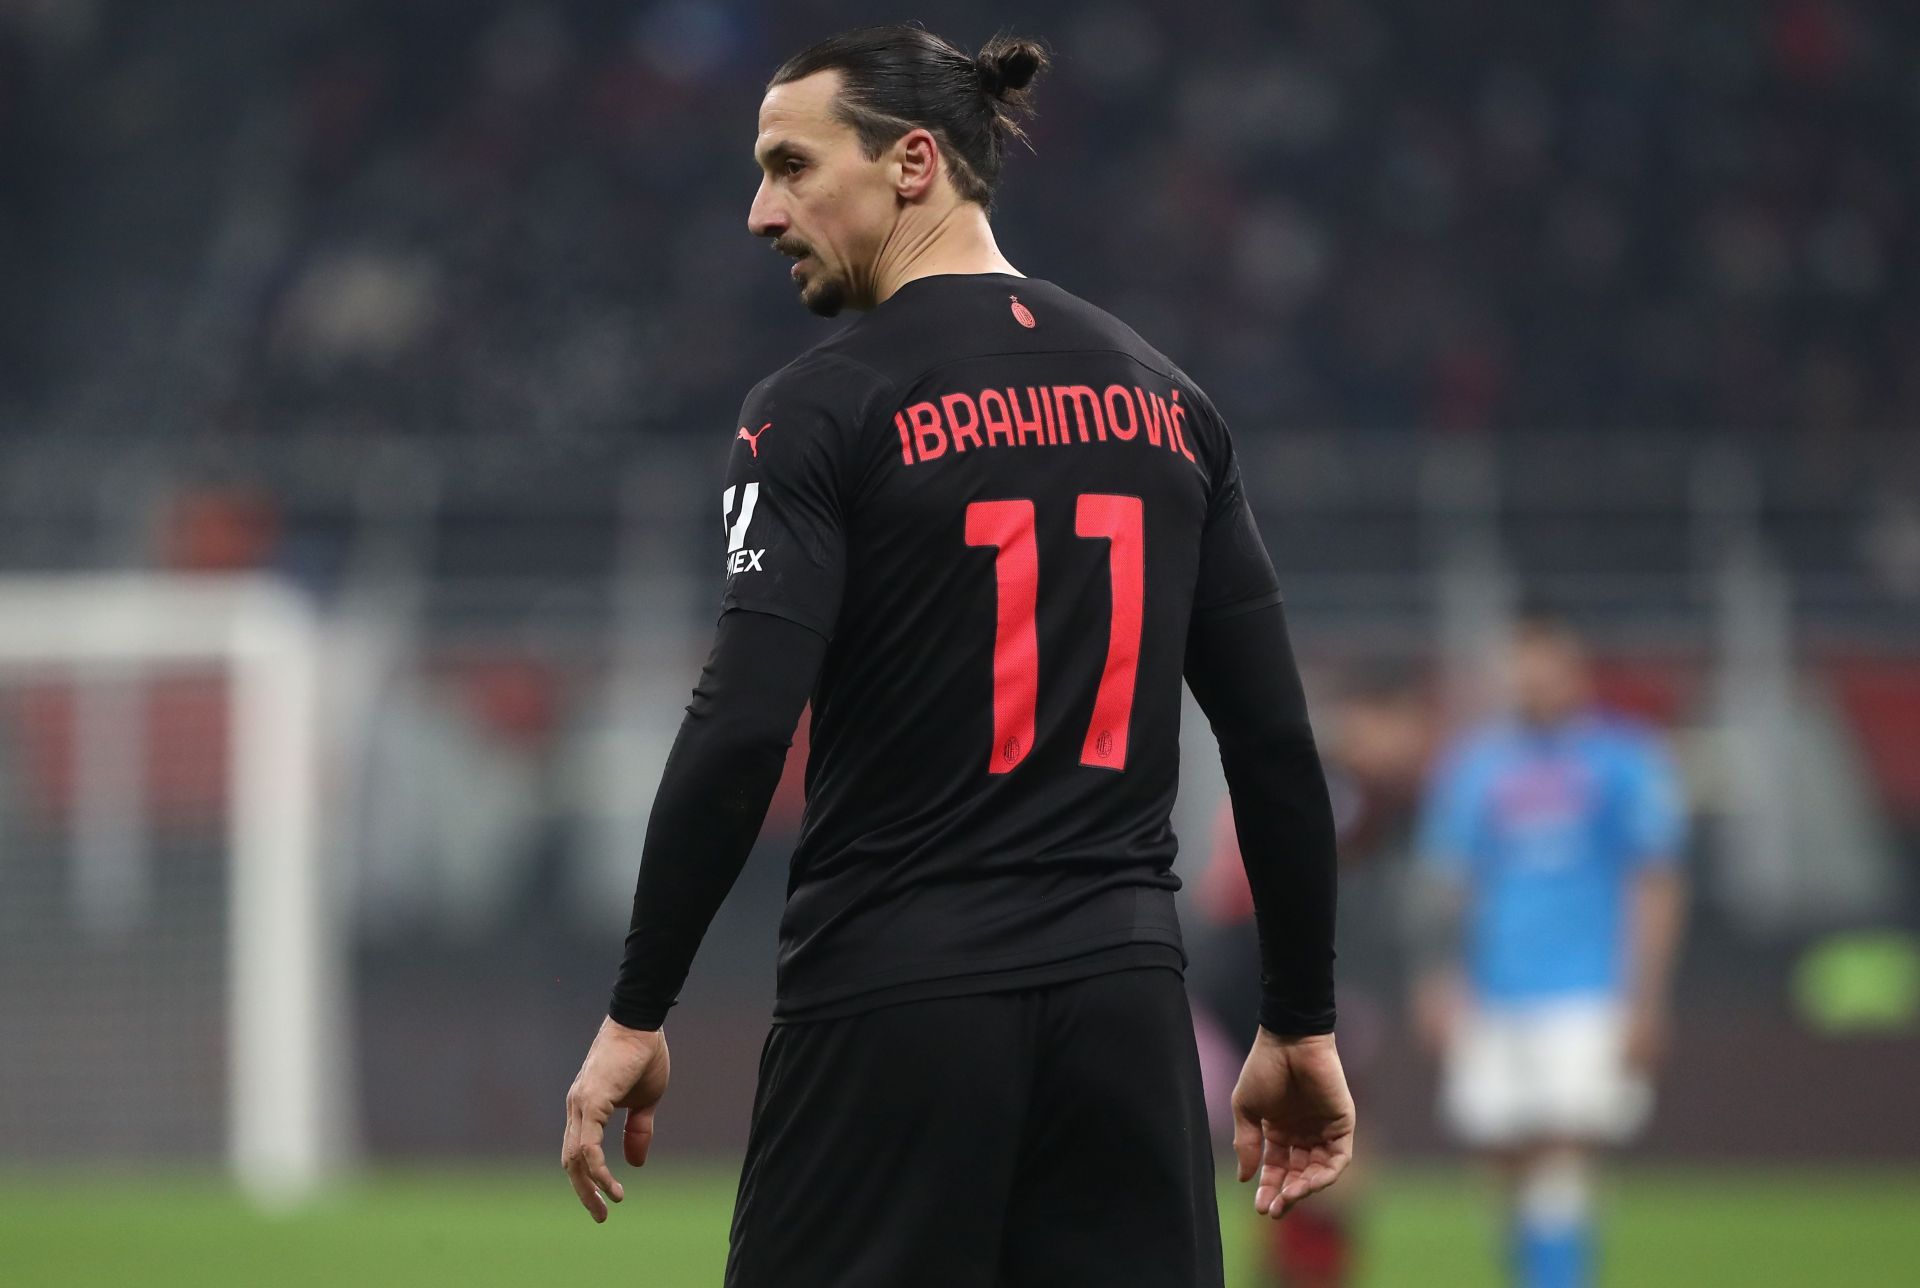 Ibrahimovic continues to suffer from injury woes.